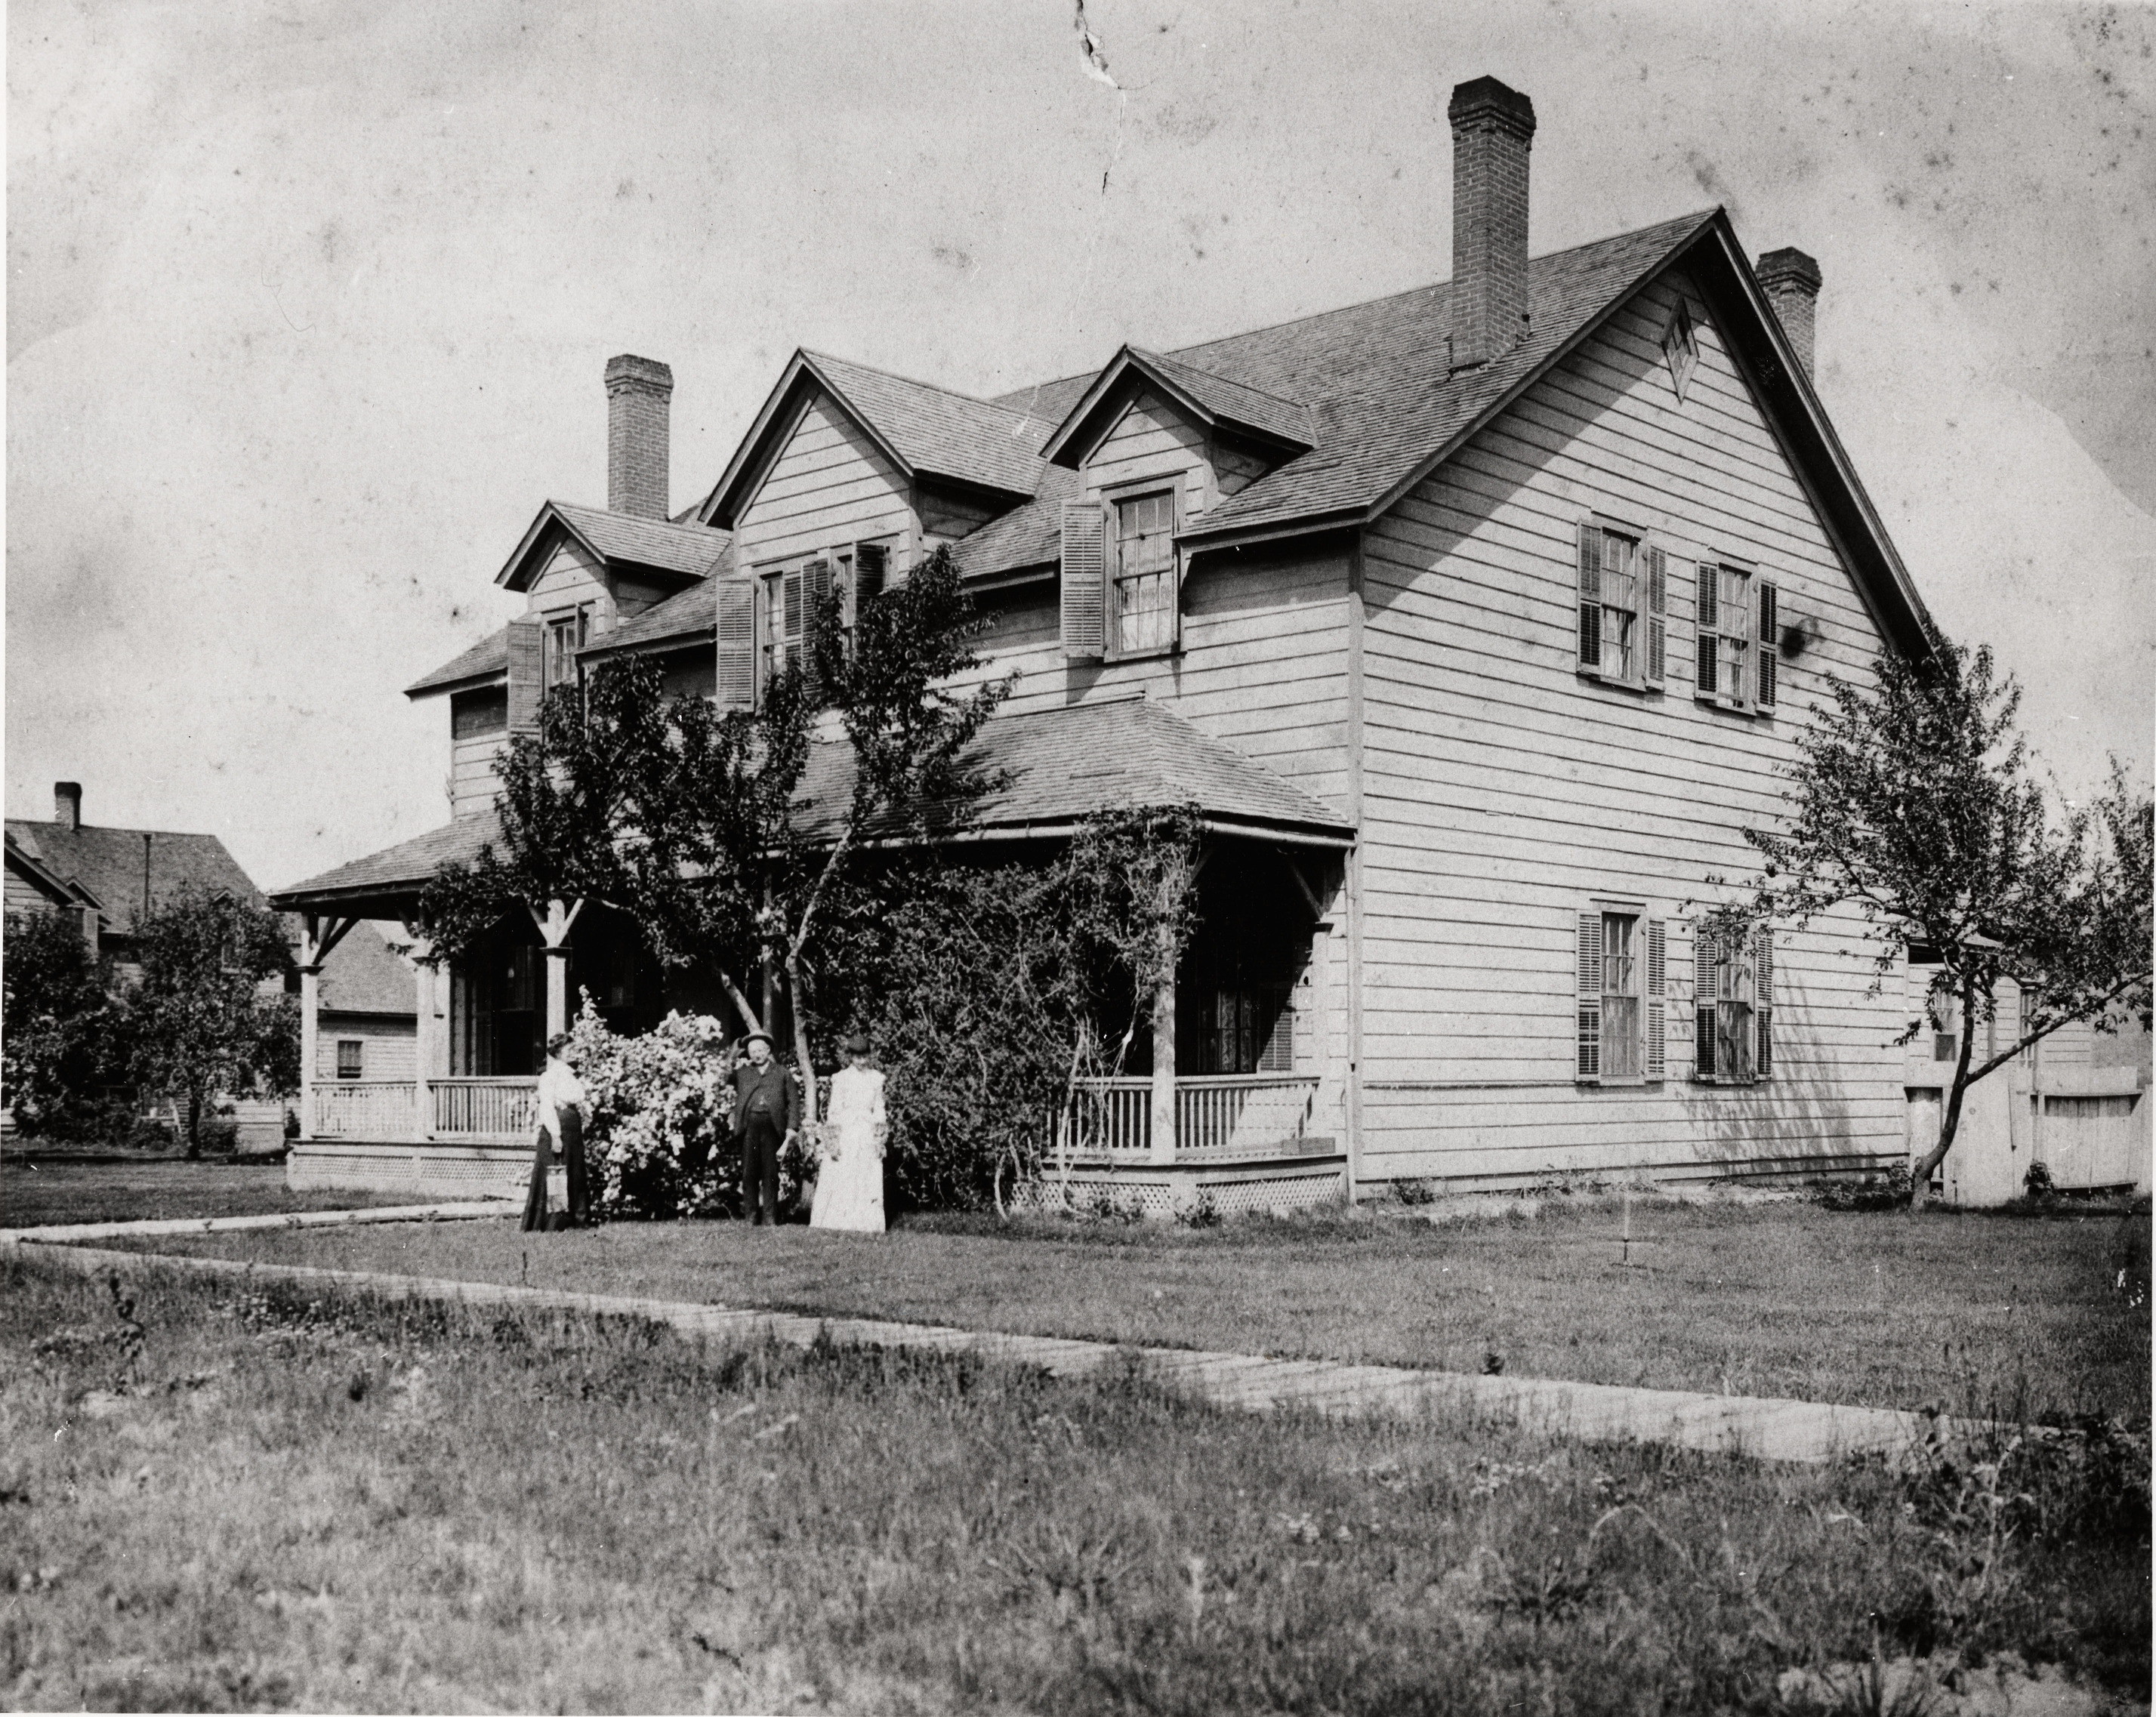 Black and white photograph of a two story house with three people in the yard